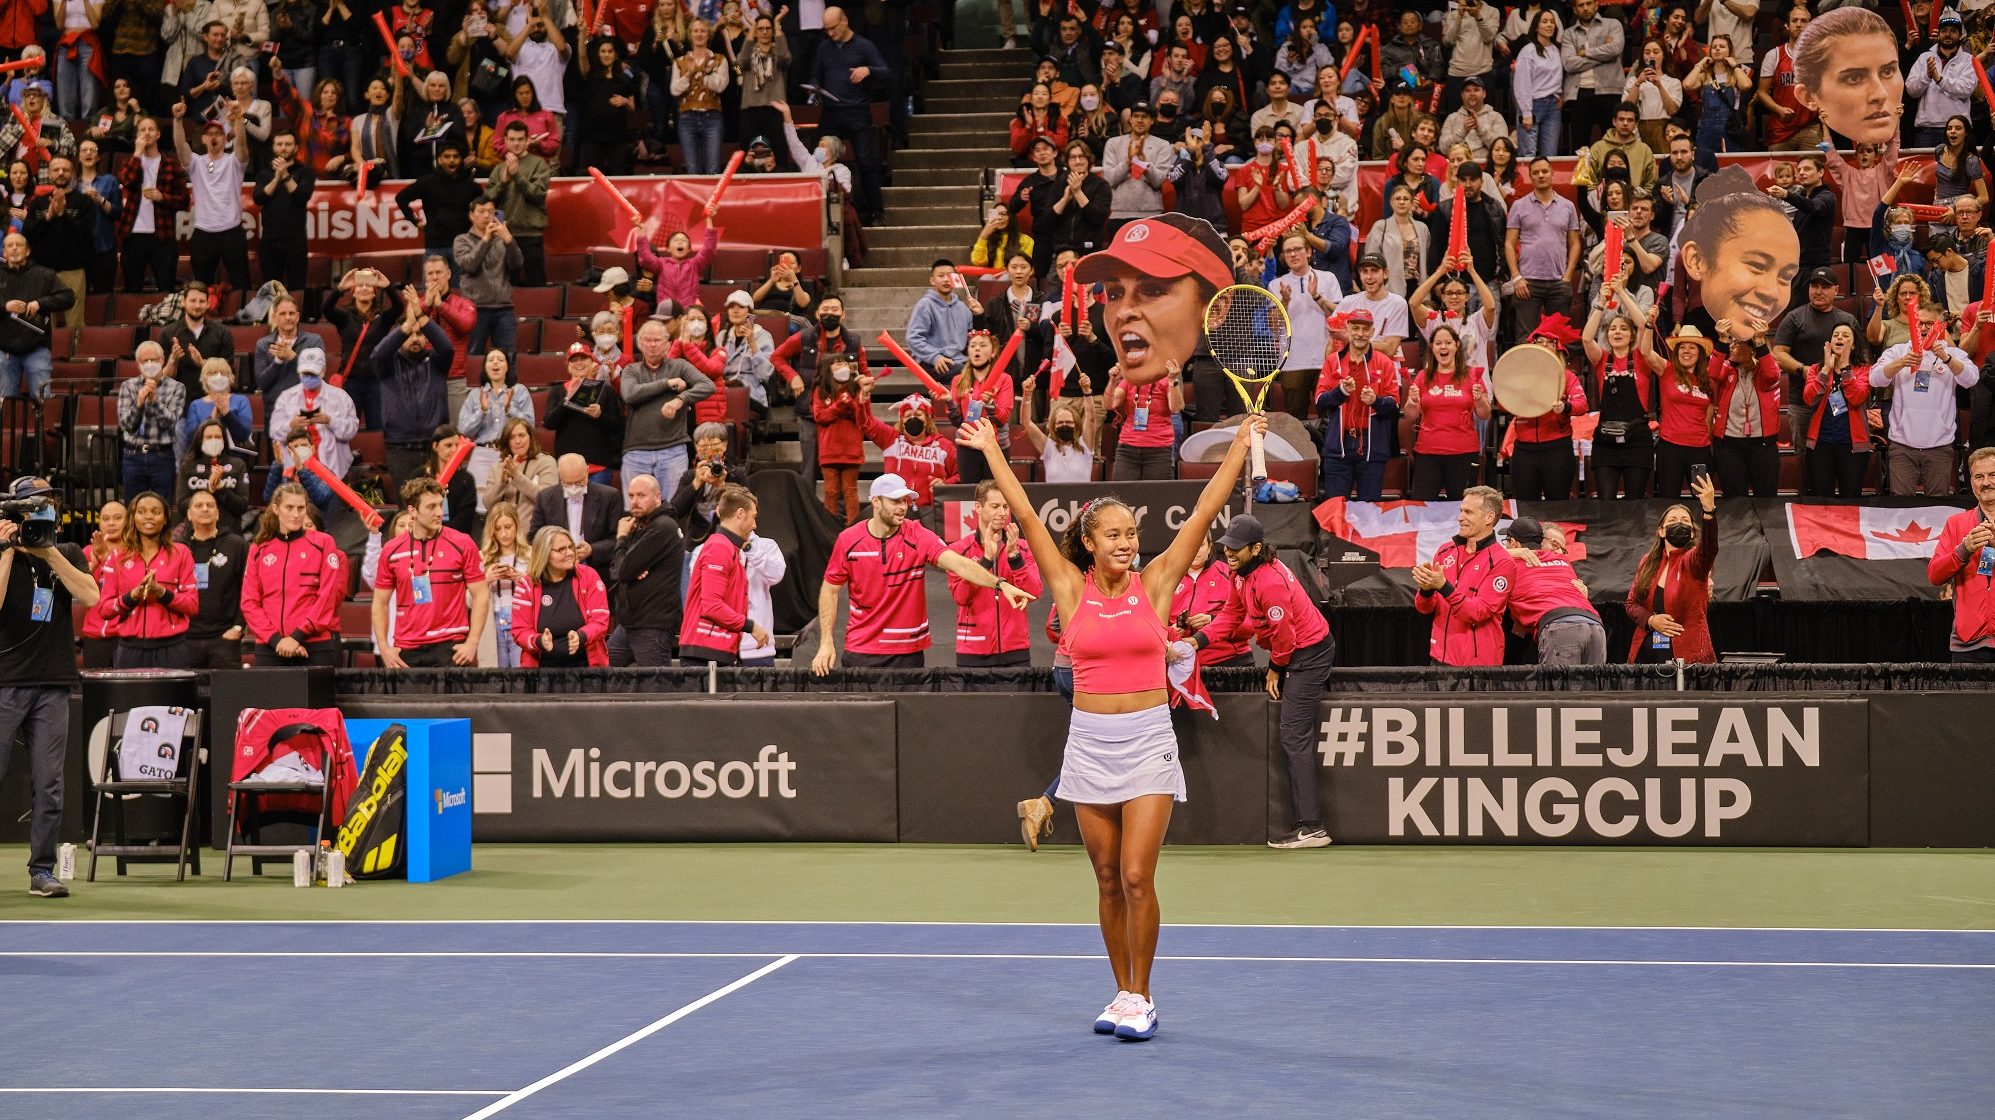 The World Cup of women's tennis returns to Vancouver this April as